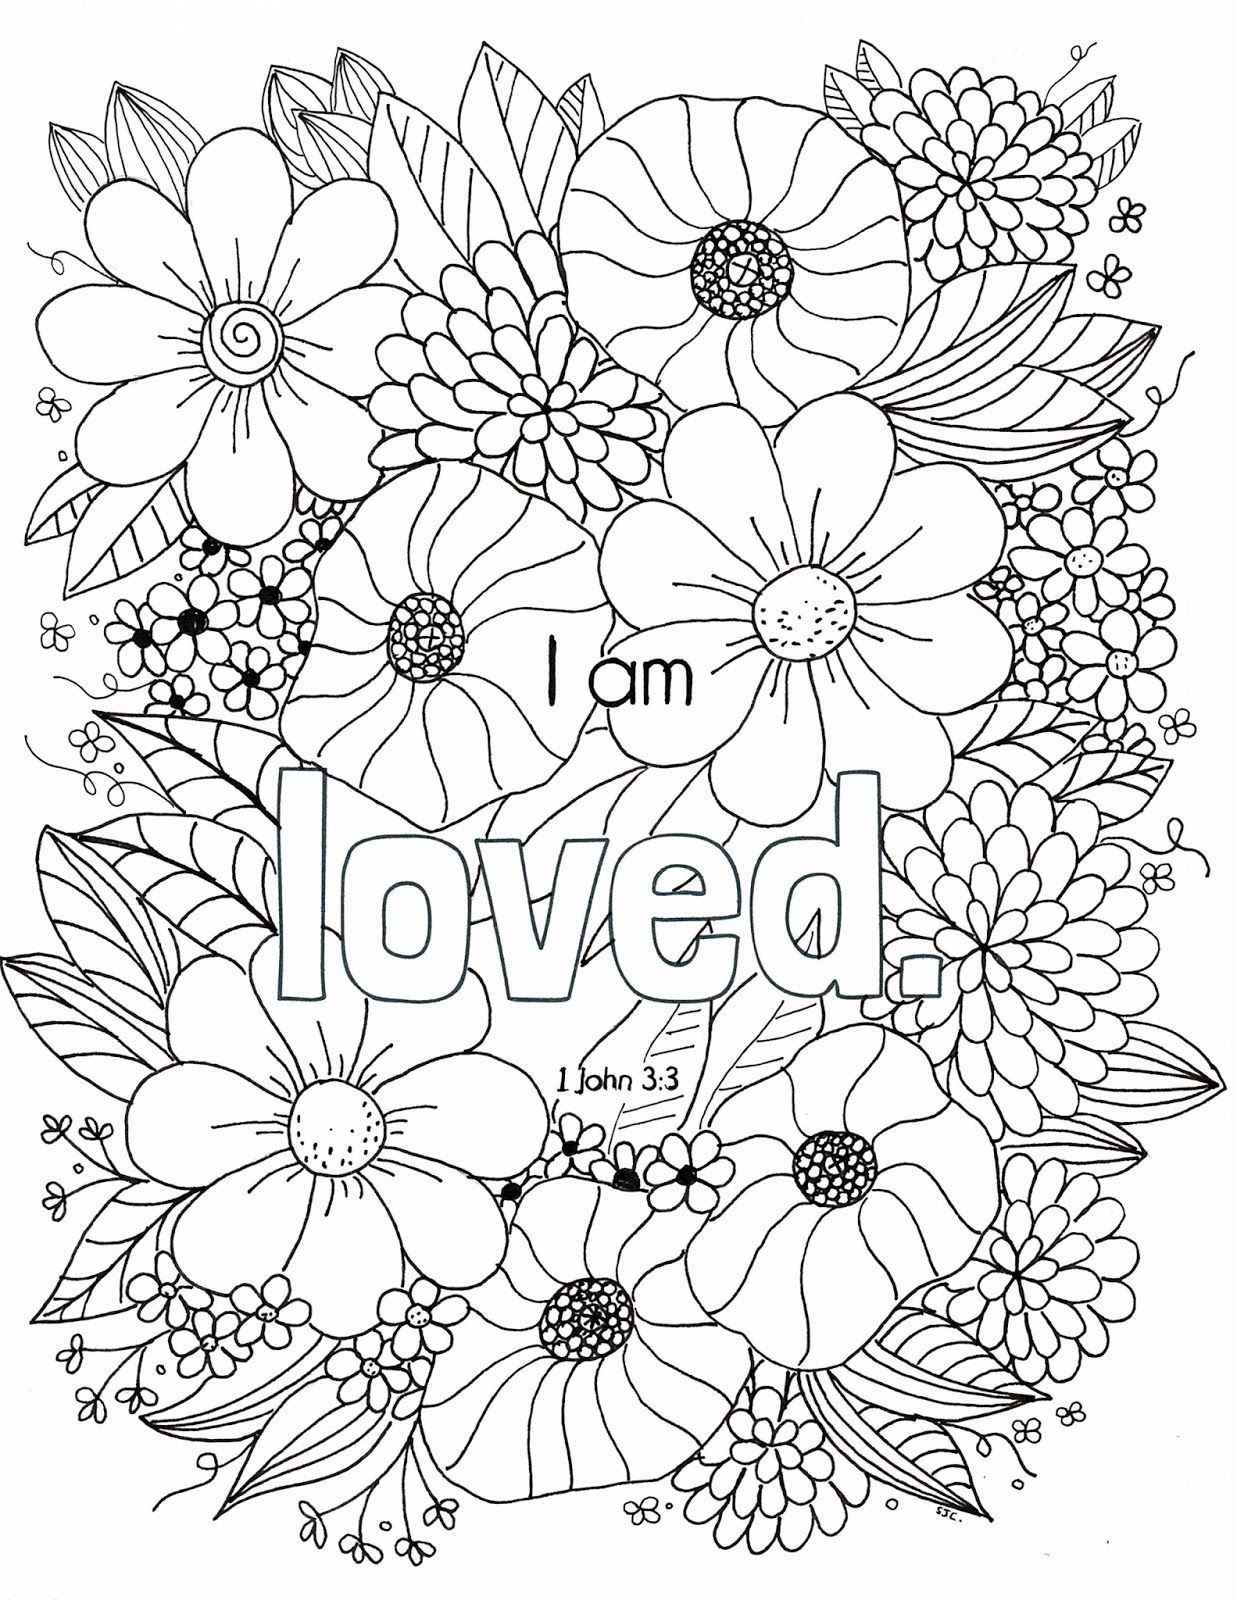 Bible Verses Coloring Pages For Adults
 Wel e to the “Who I am In Christ” Coloring Page Series